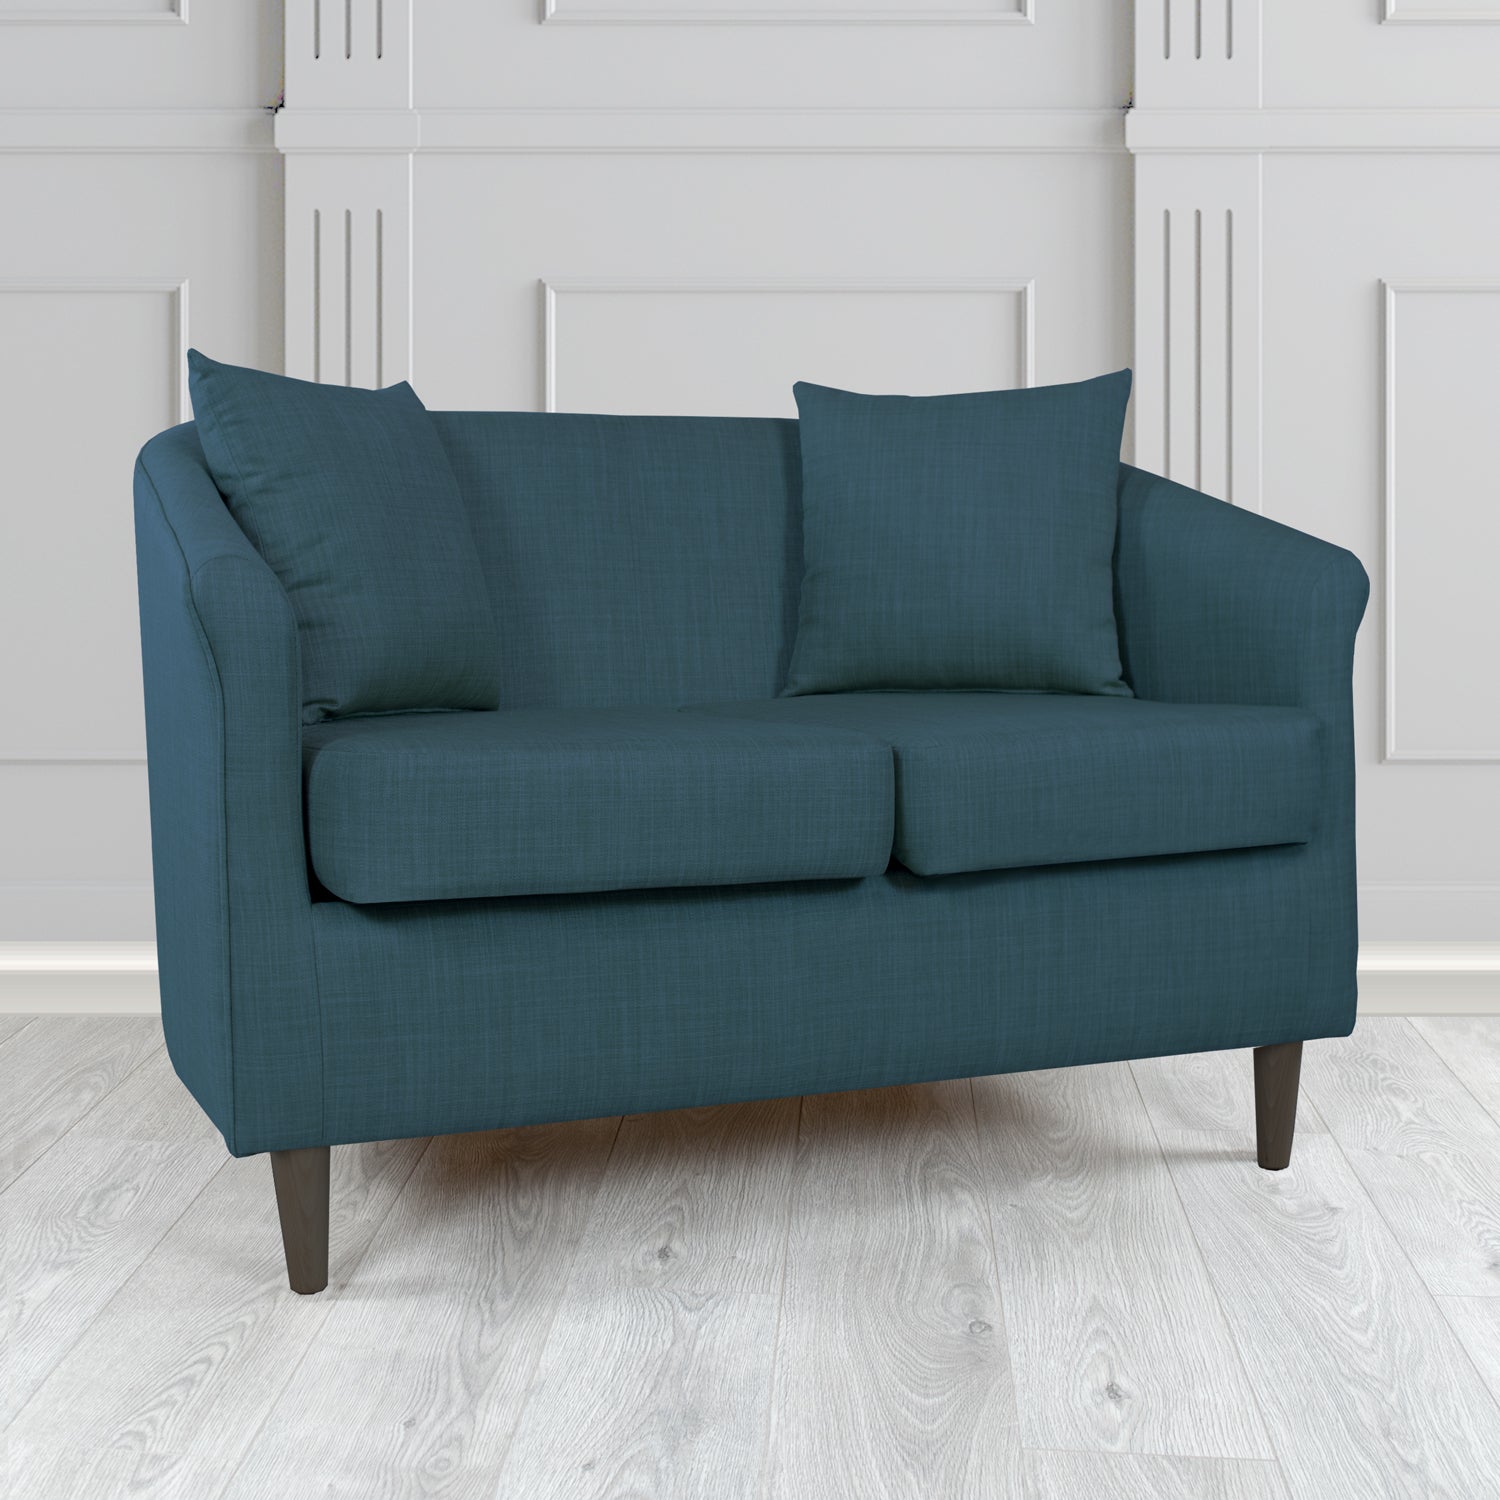 St Tropez Charles Midnight Plain Linen Fabric 2 Seater Tub Sofa with Scatter Cushions - The Tub Chair Shop